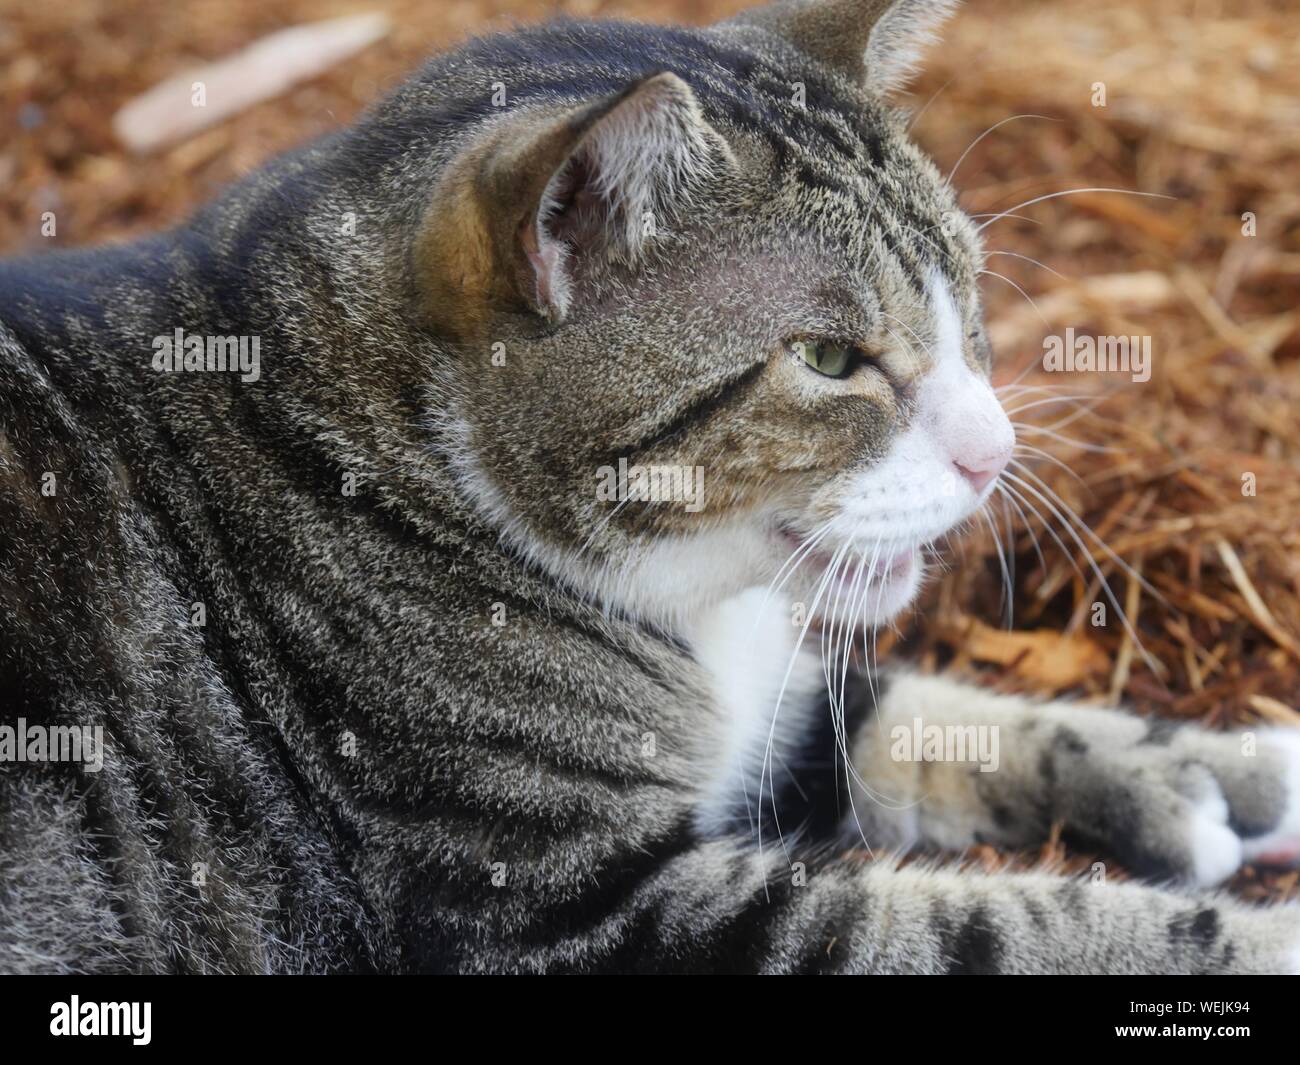 Close up shot of a cat's head, side view. This is one of the Hemingway cats in Key West, Florida. Stock Photo